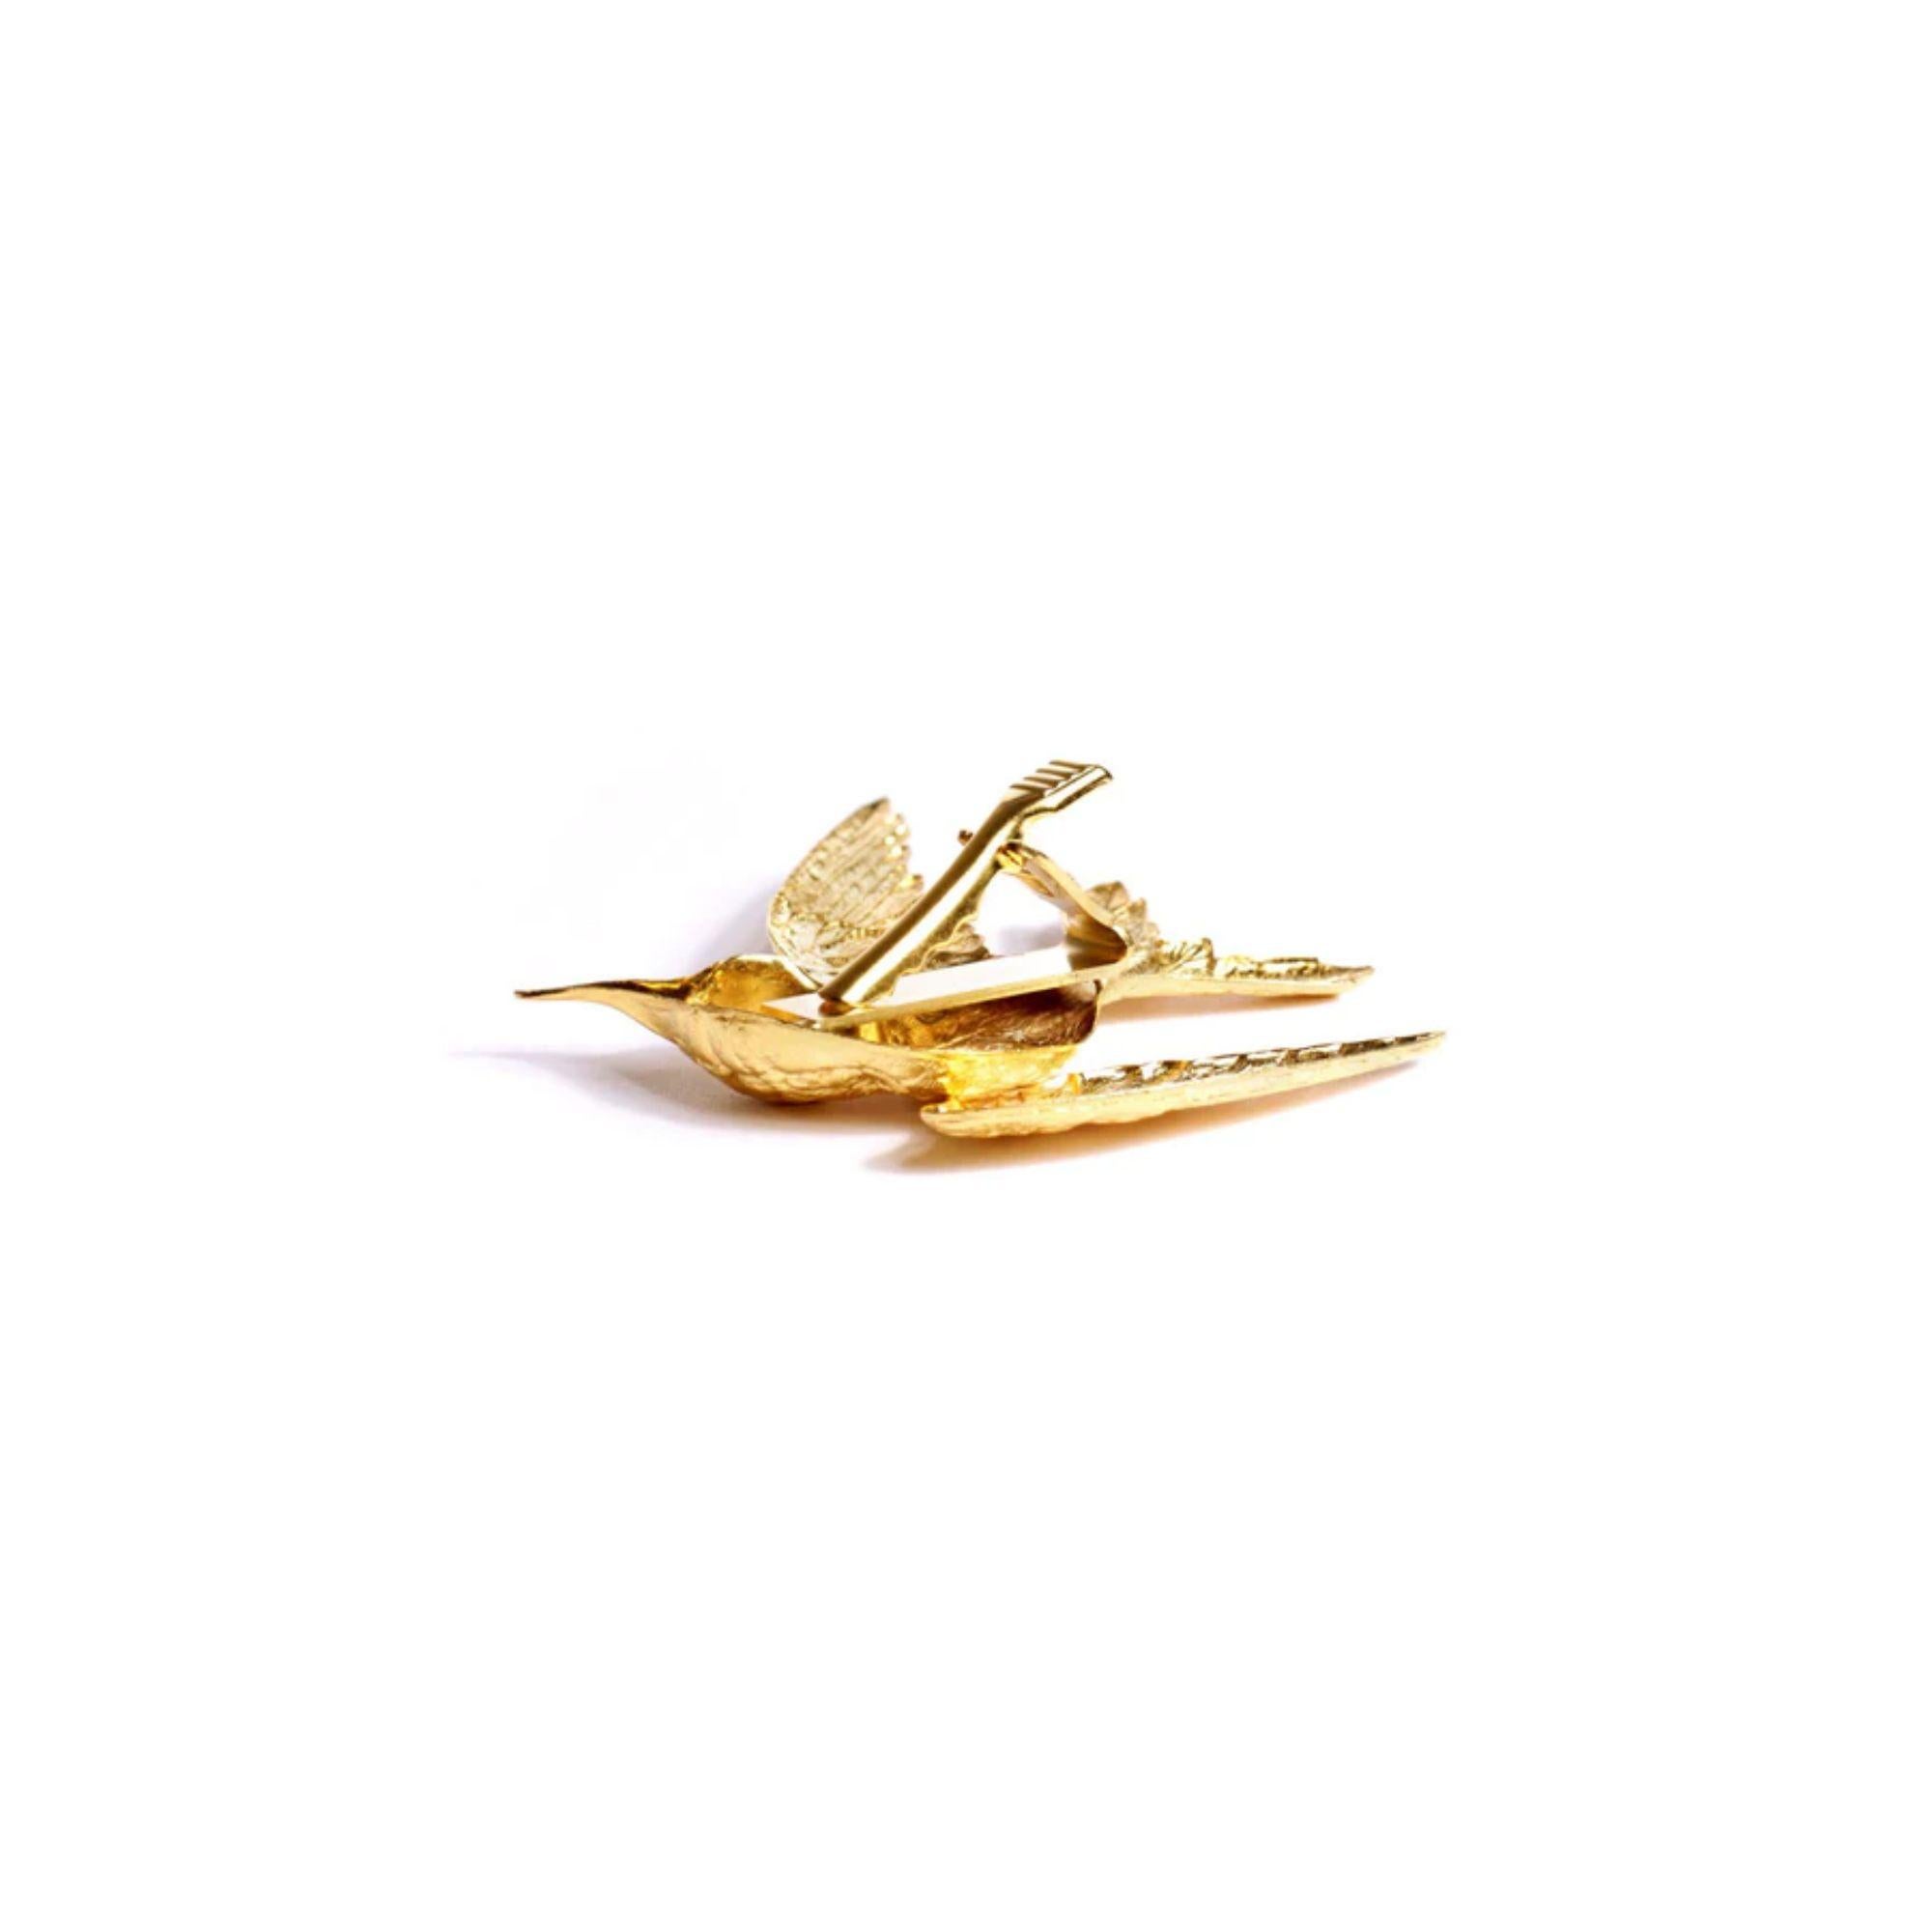 Stunning 24k gold plated hummingbird clip for your tie, for your sweater, for your tshirt, for your lapel. Made in America. Plated on Brass.

Additional Information:
Material: 24K Gold, Brass